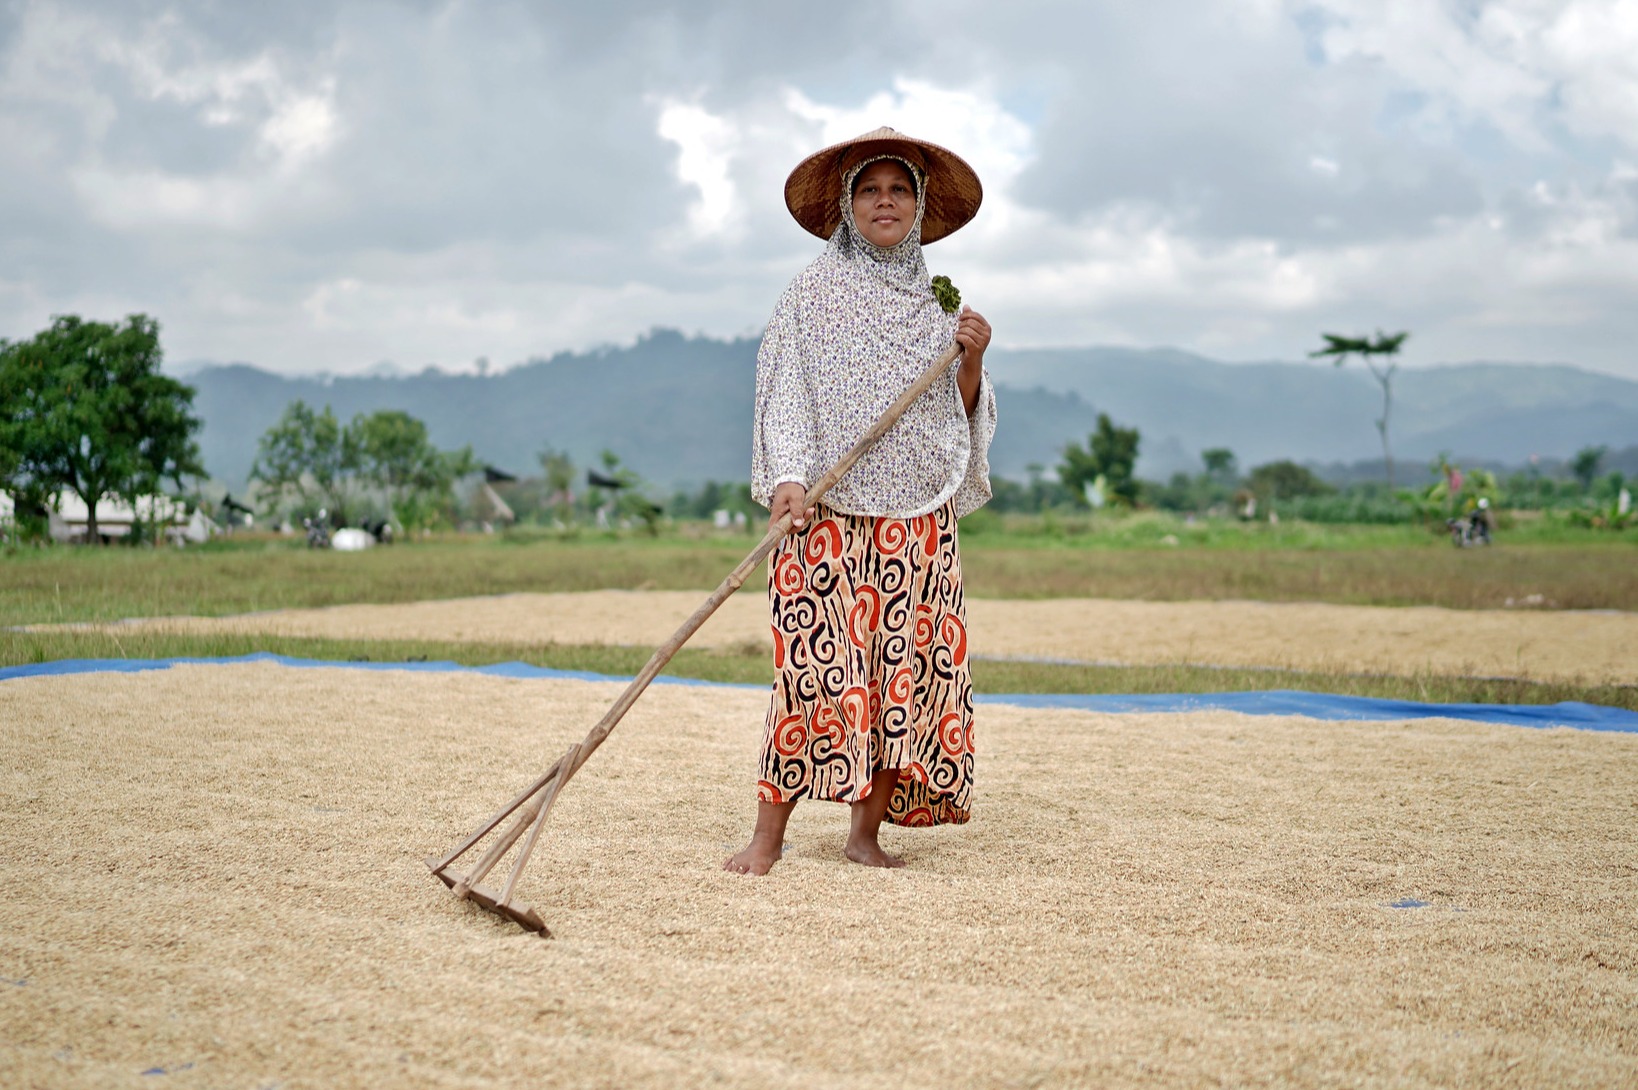 Photo of a farmer drying the harvested rice grains.